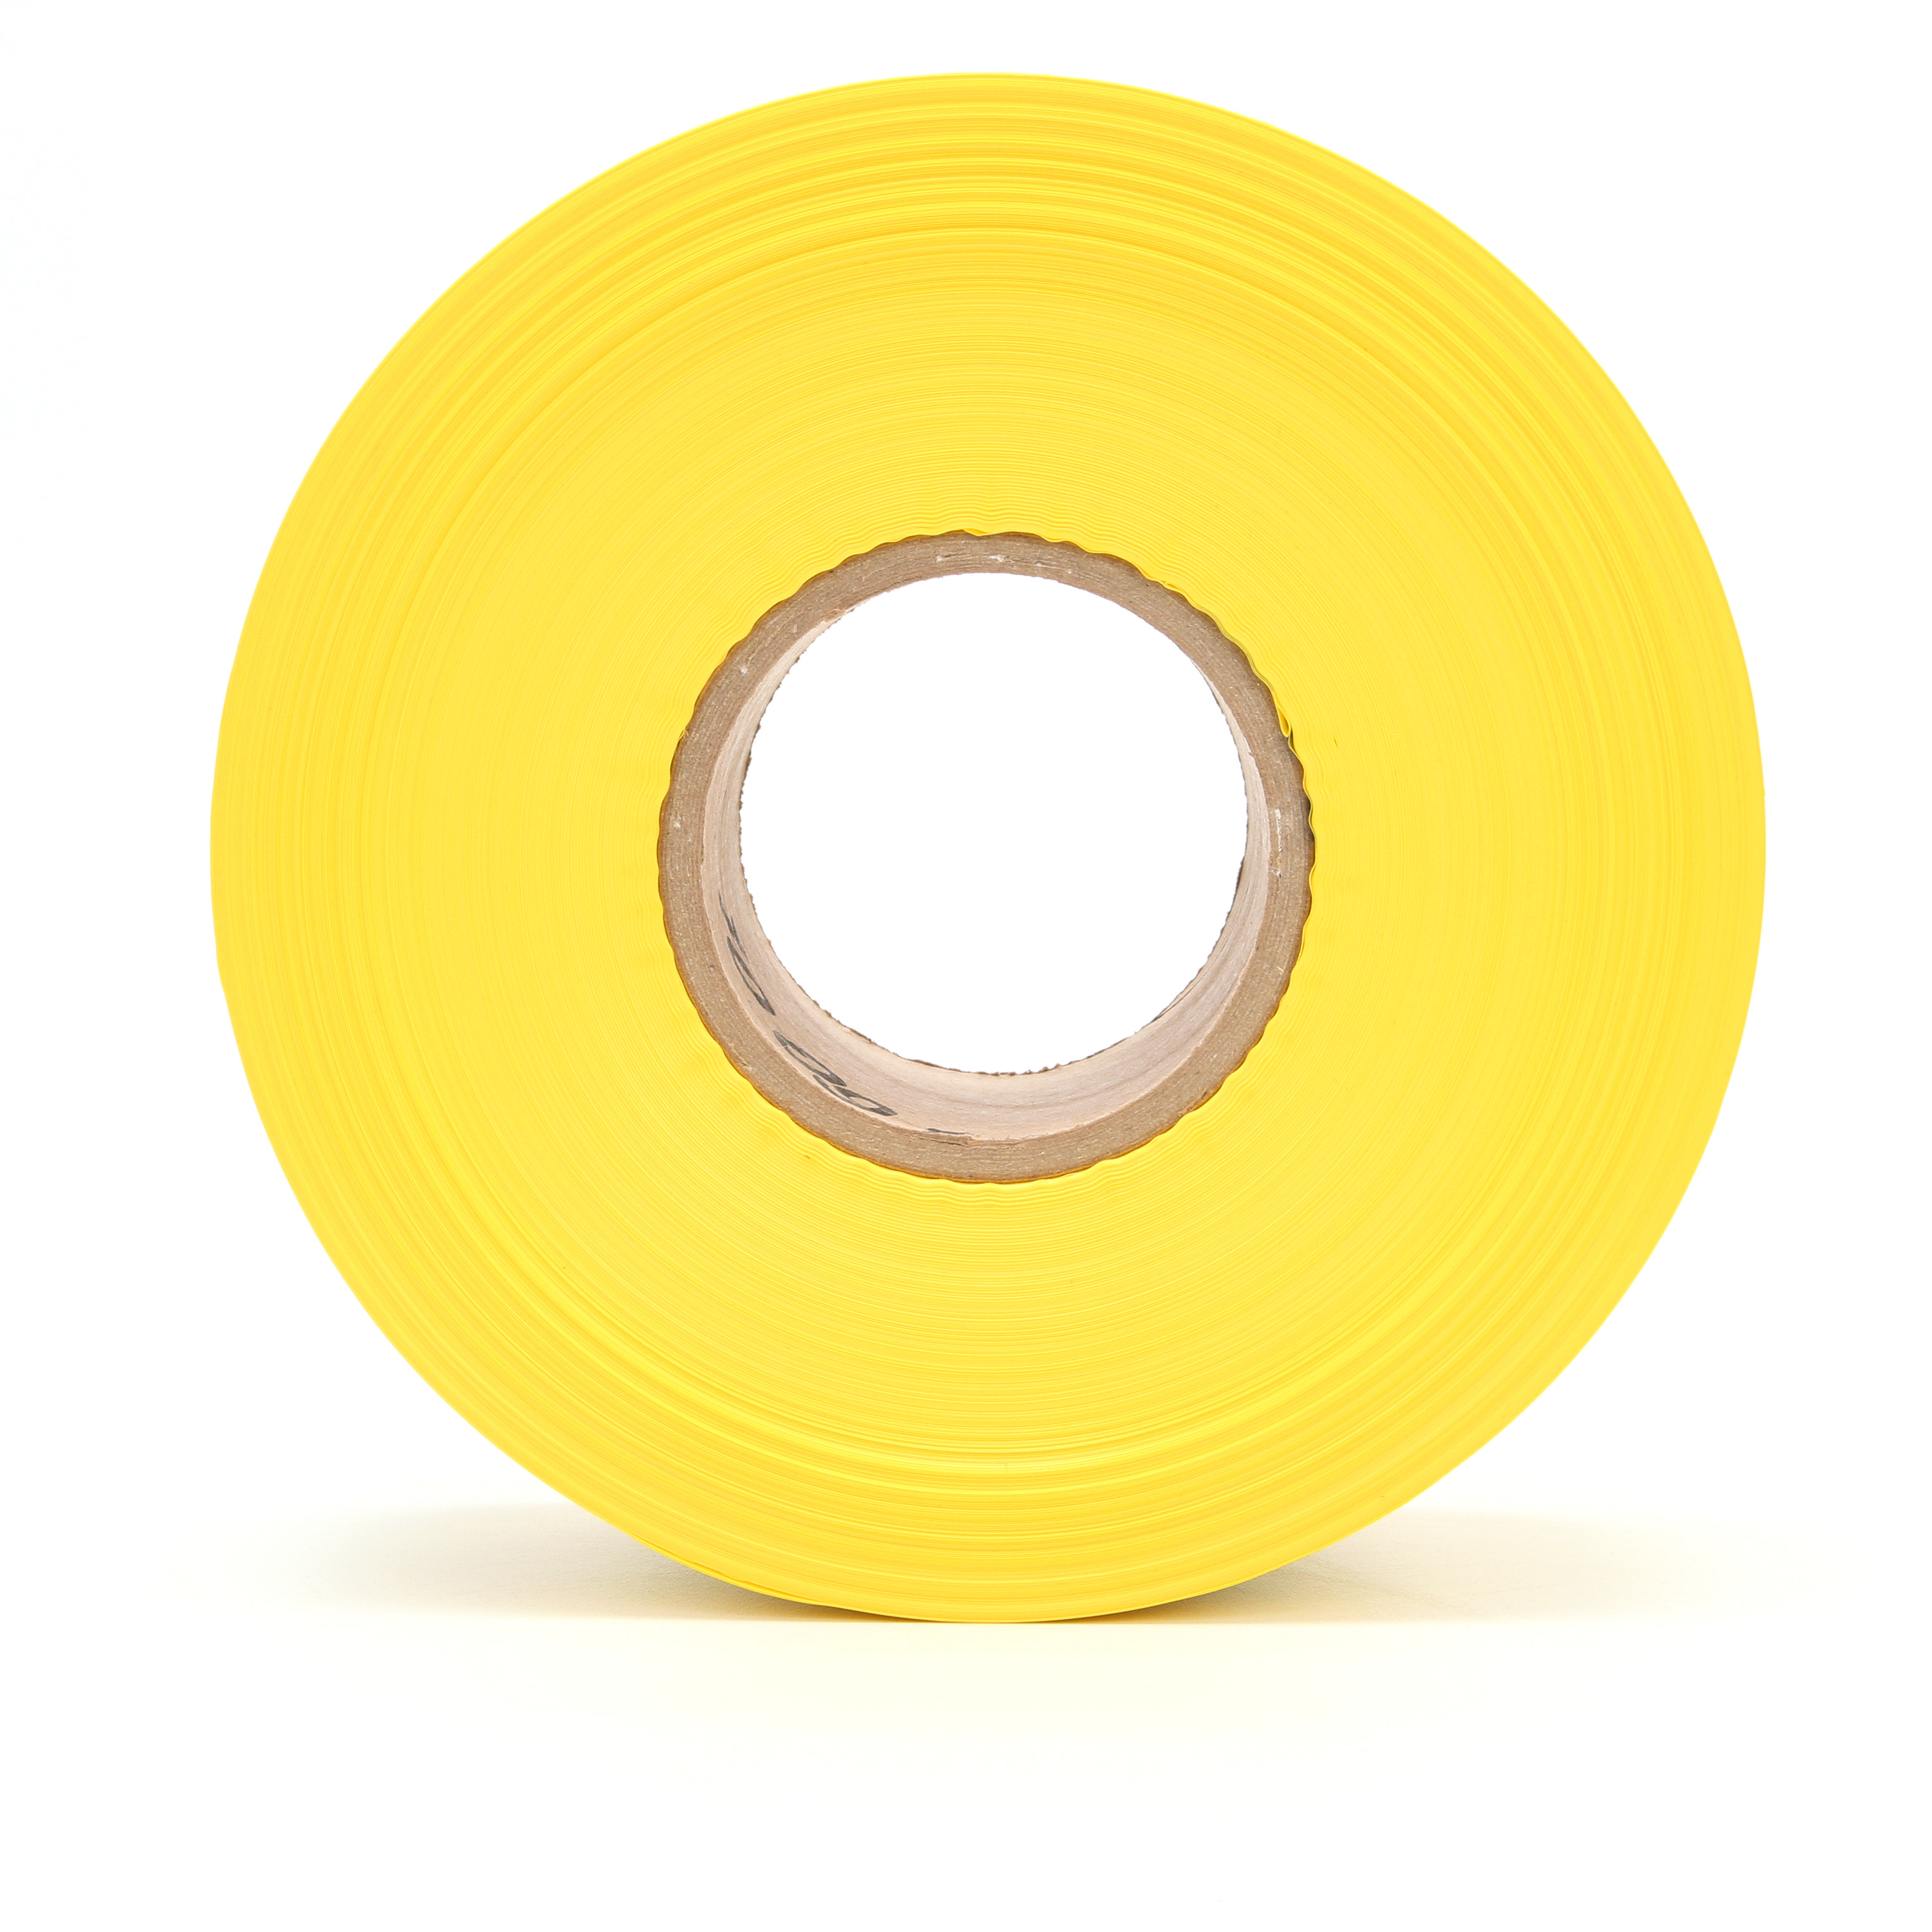 Scotch® Buried Barricade Tape 364, CAUTION BURIED ELECTRIC LINE BELOW, 3
in x 1000 ft, Yellow, 8 rolls/Case